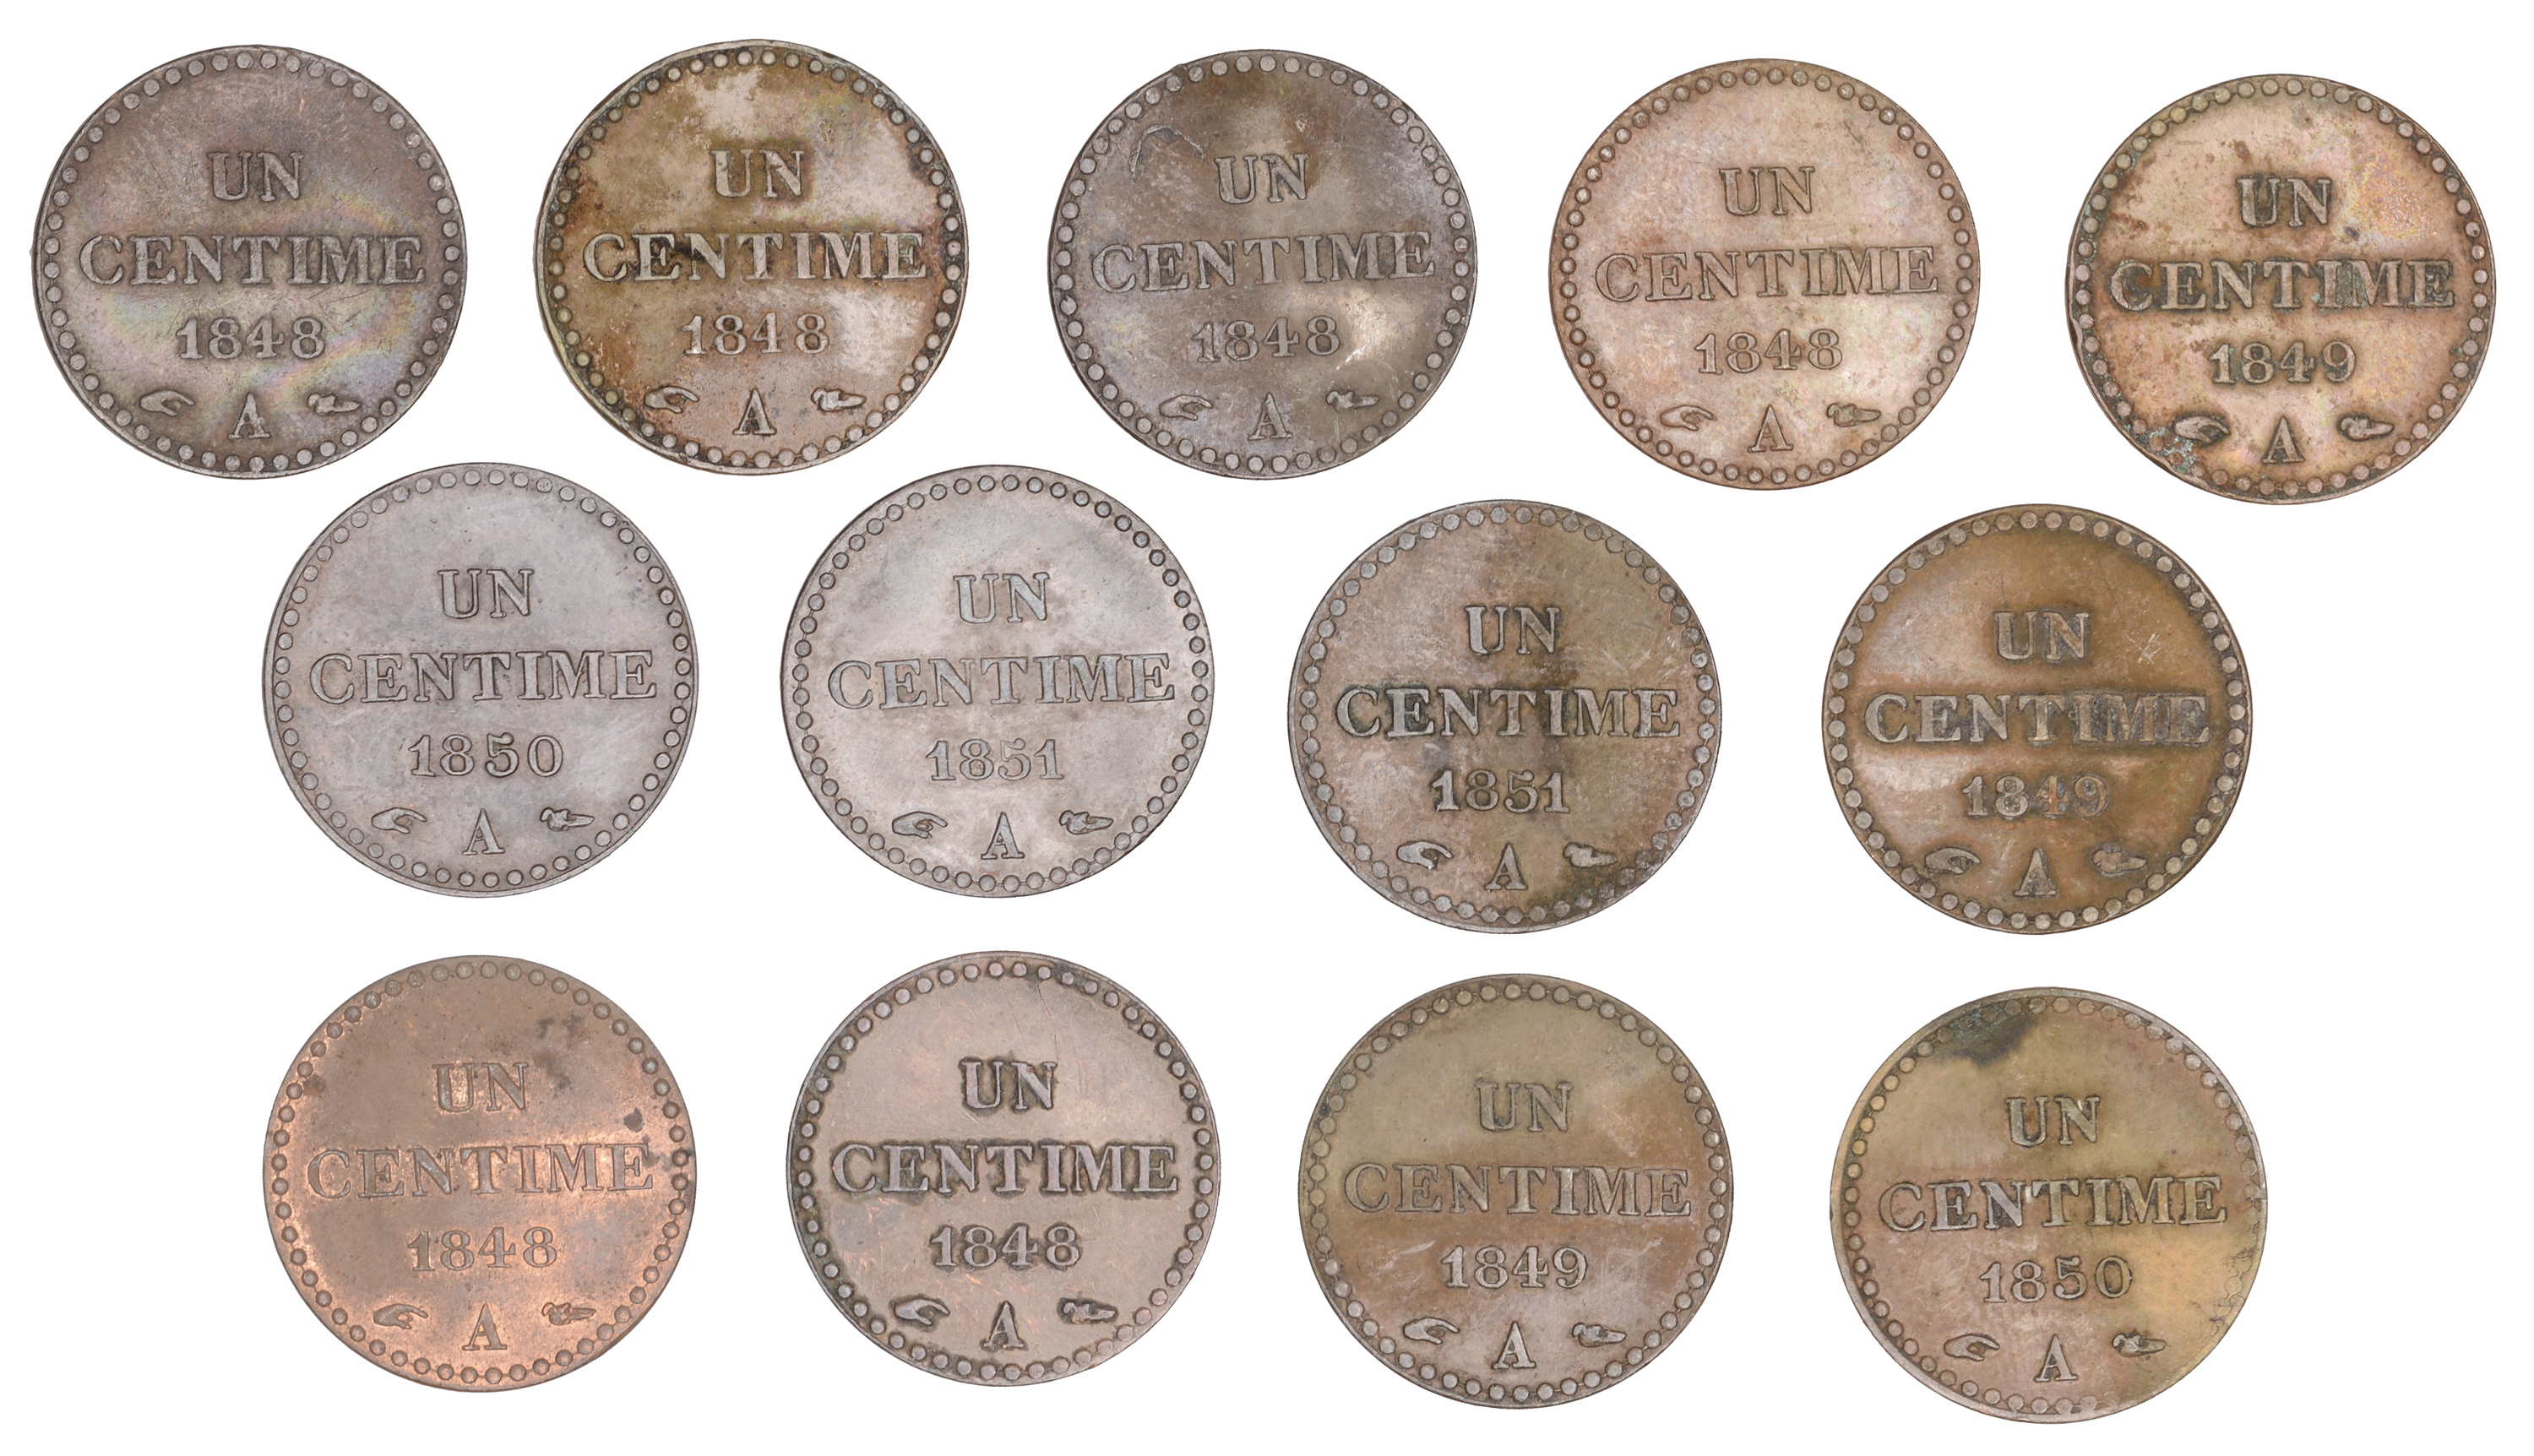 France, Second Republic (1848-1852), Centimes (13), 1848a (6), 1849a (3), 1850a (2), 1851a (... - Image 2 of 2